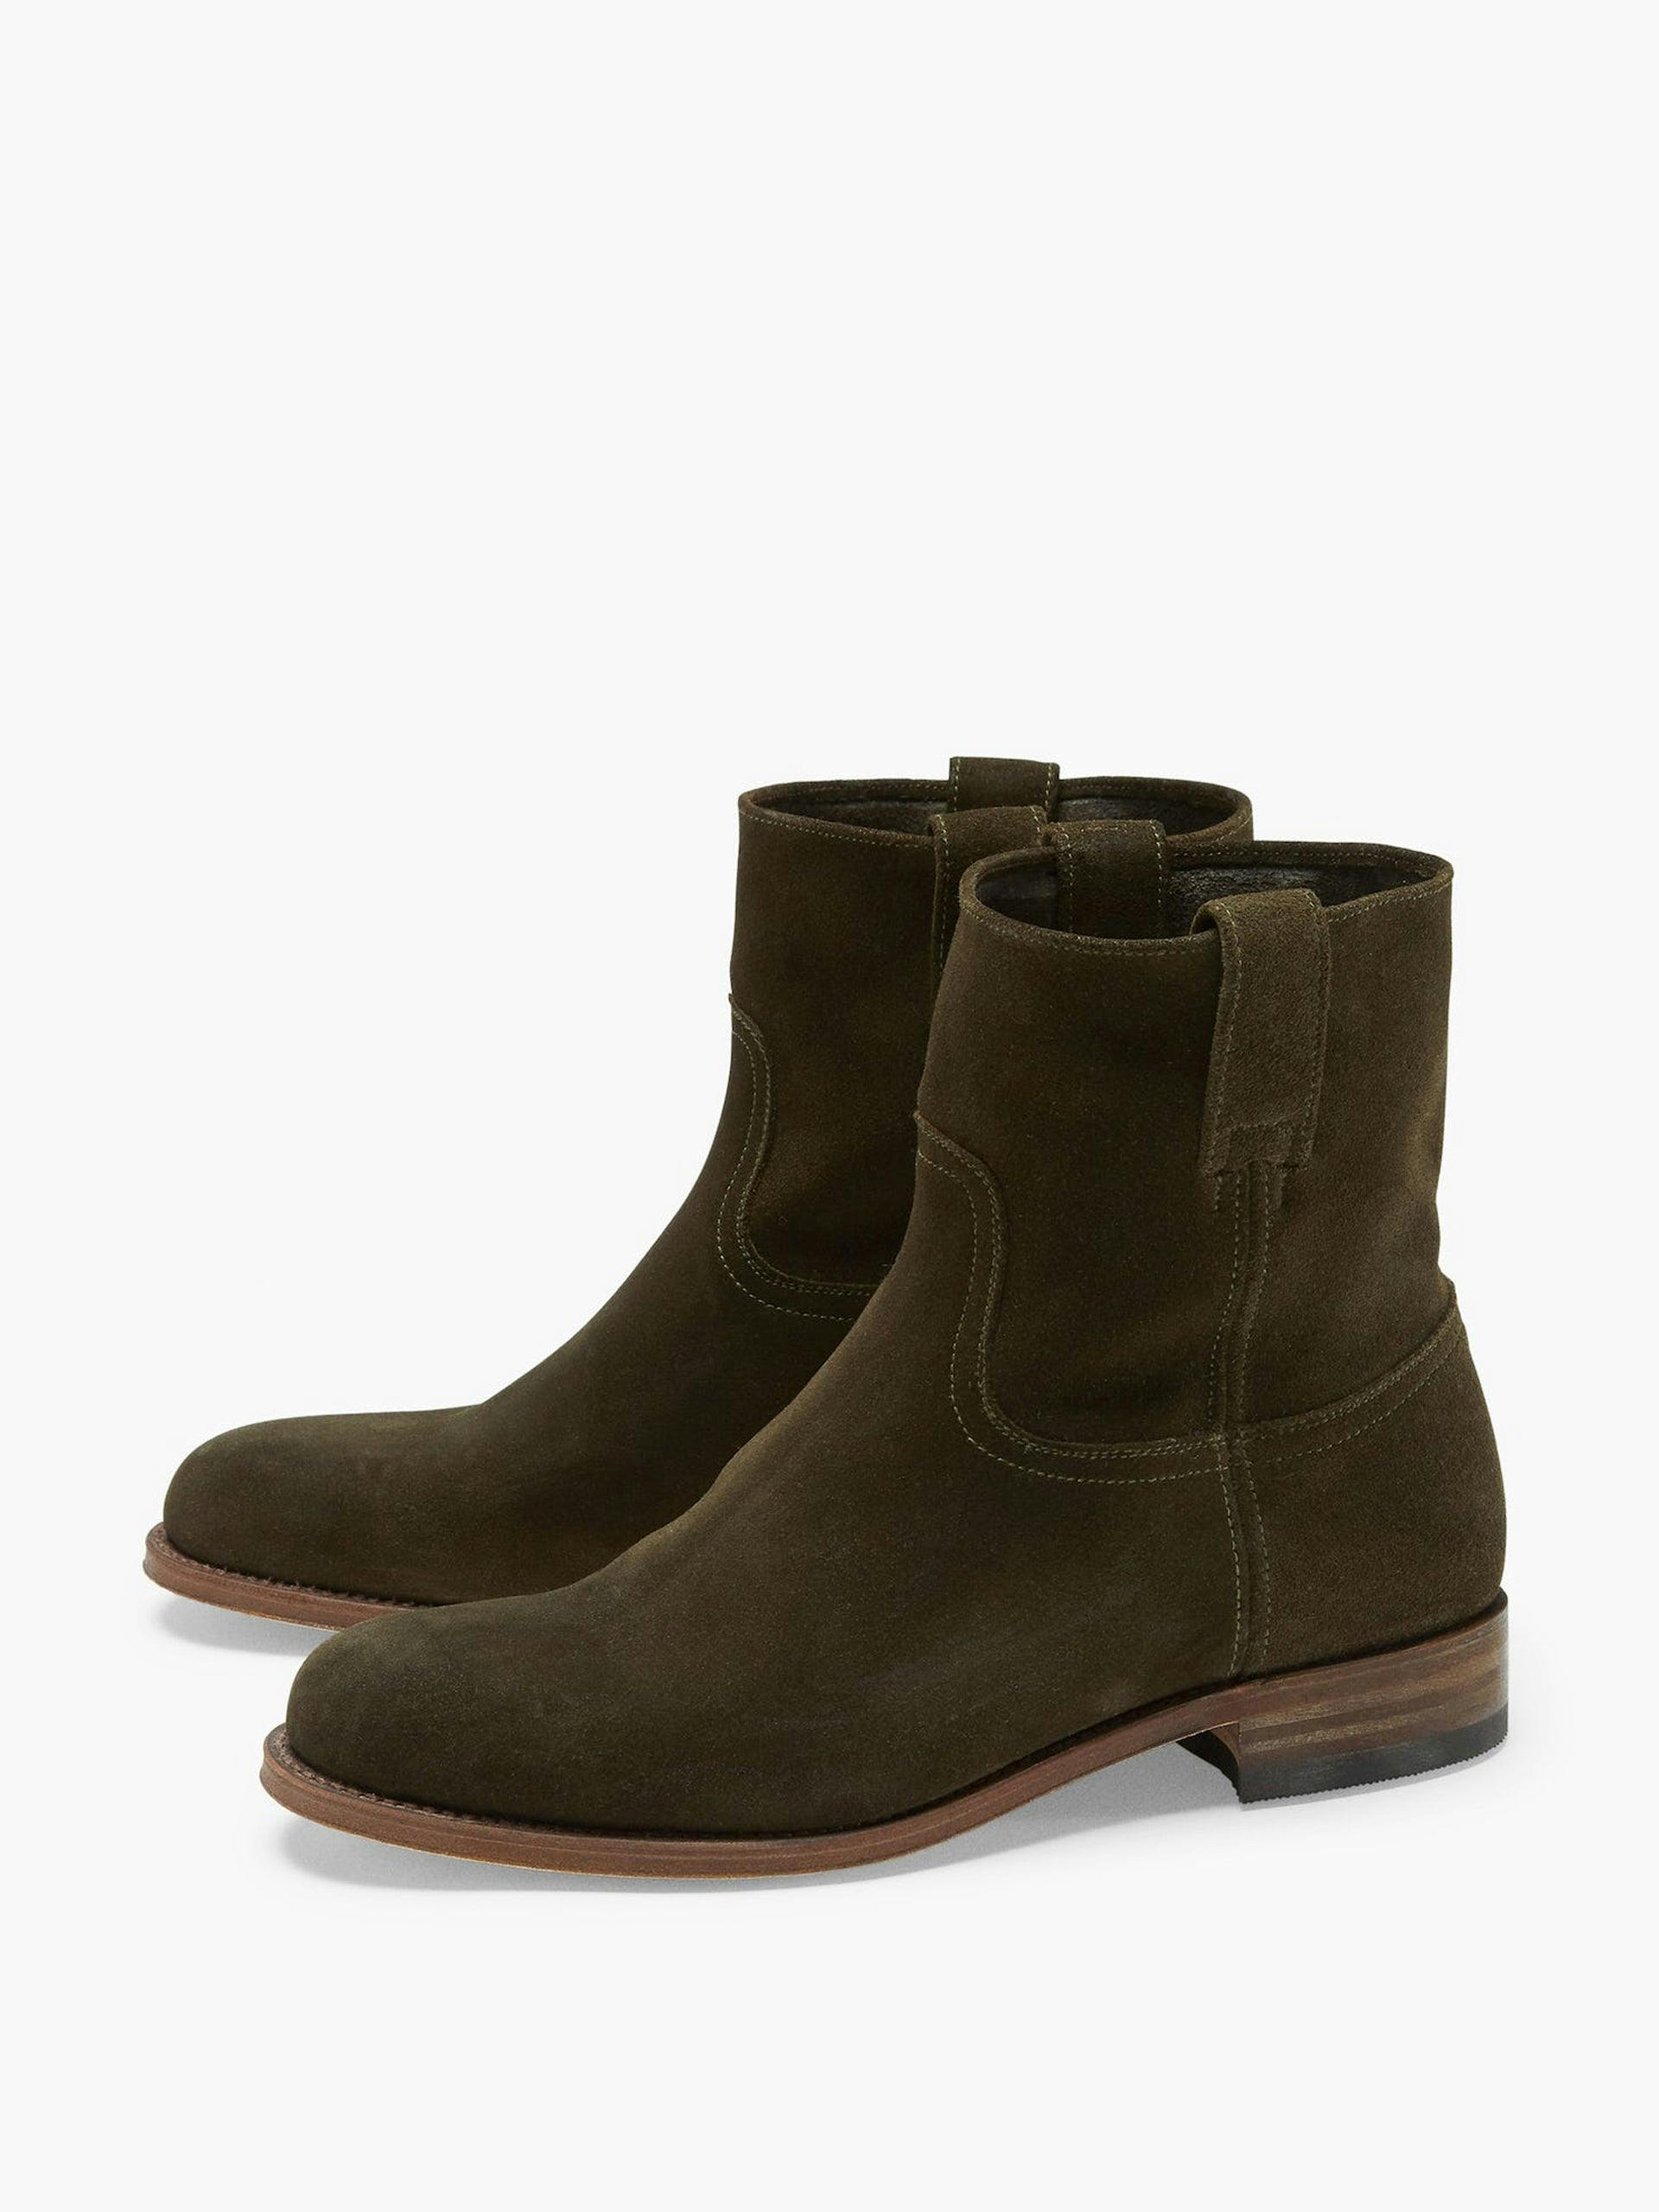 Olive green suede ankle boots